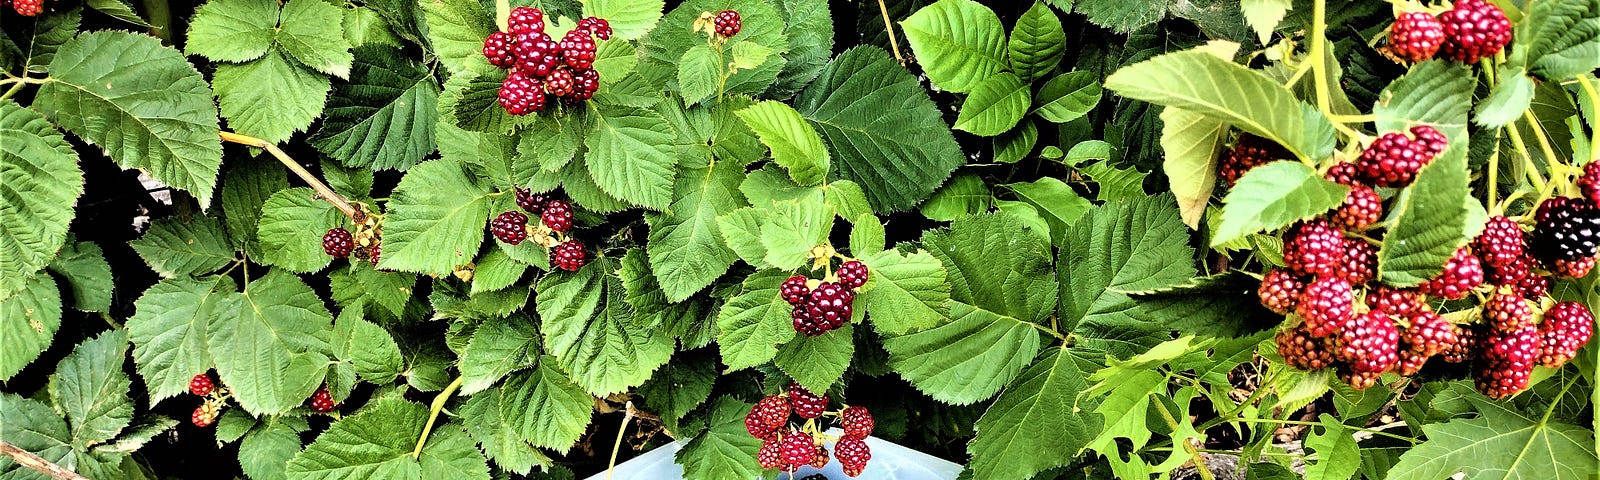 A bowl of blackberries with blackberry bush in background.